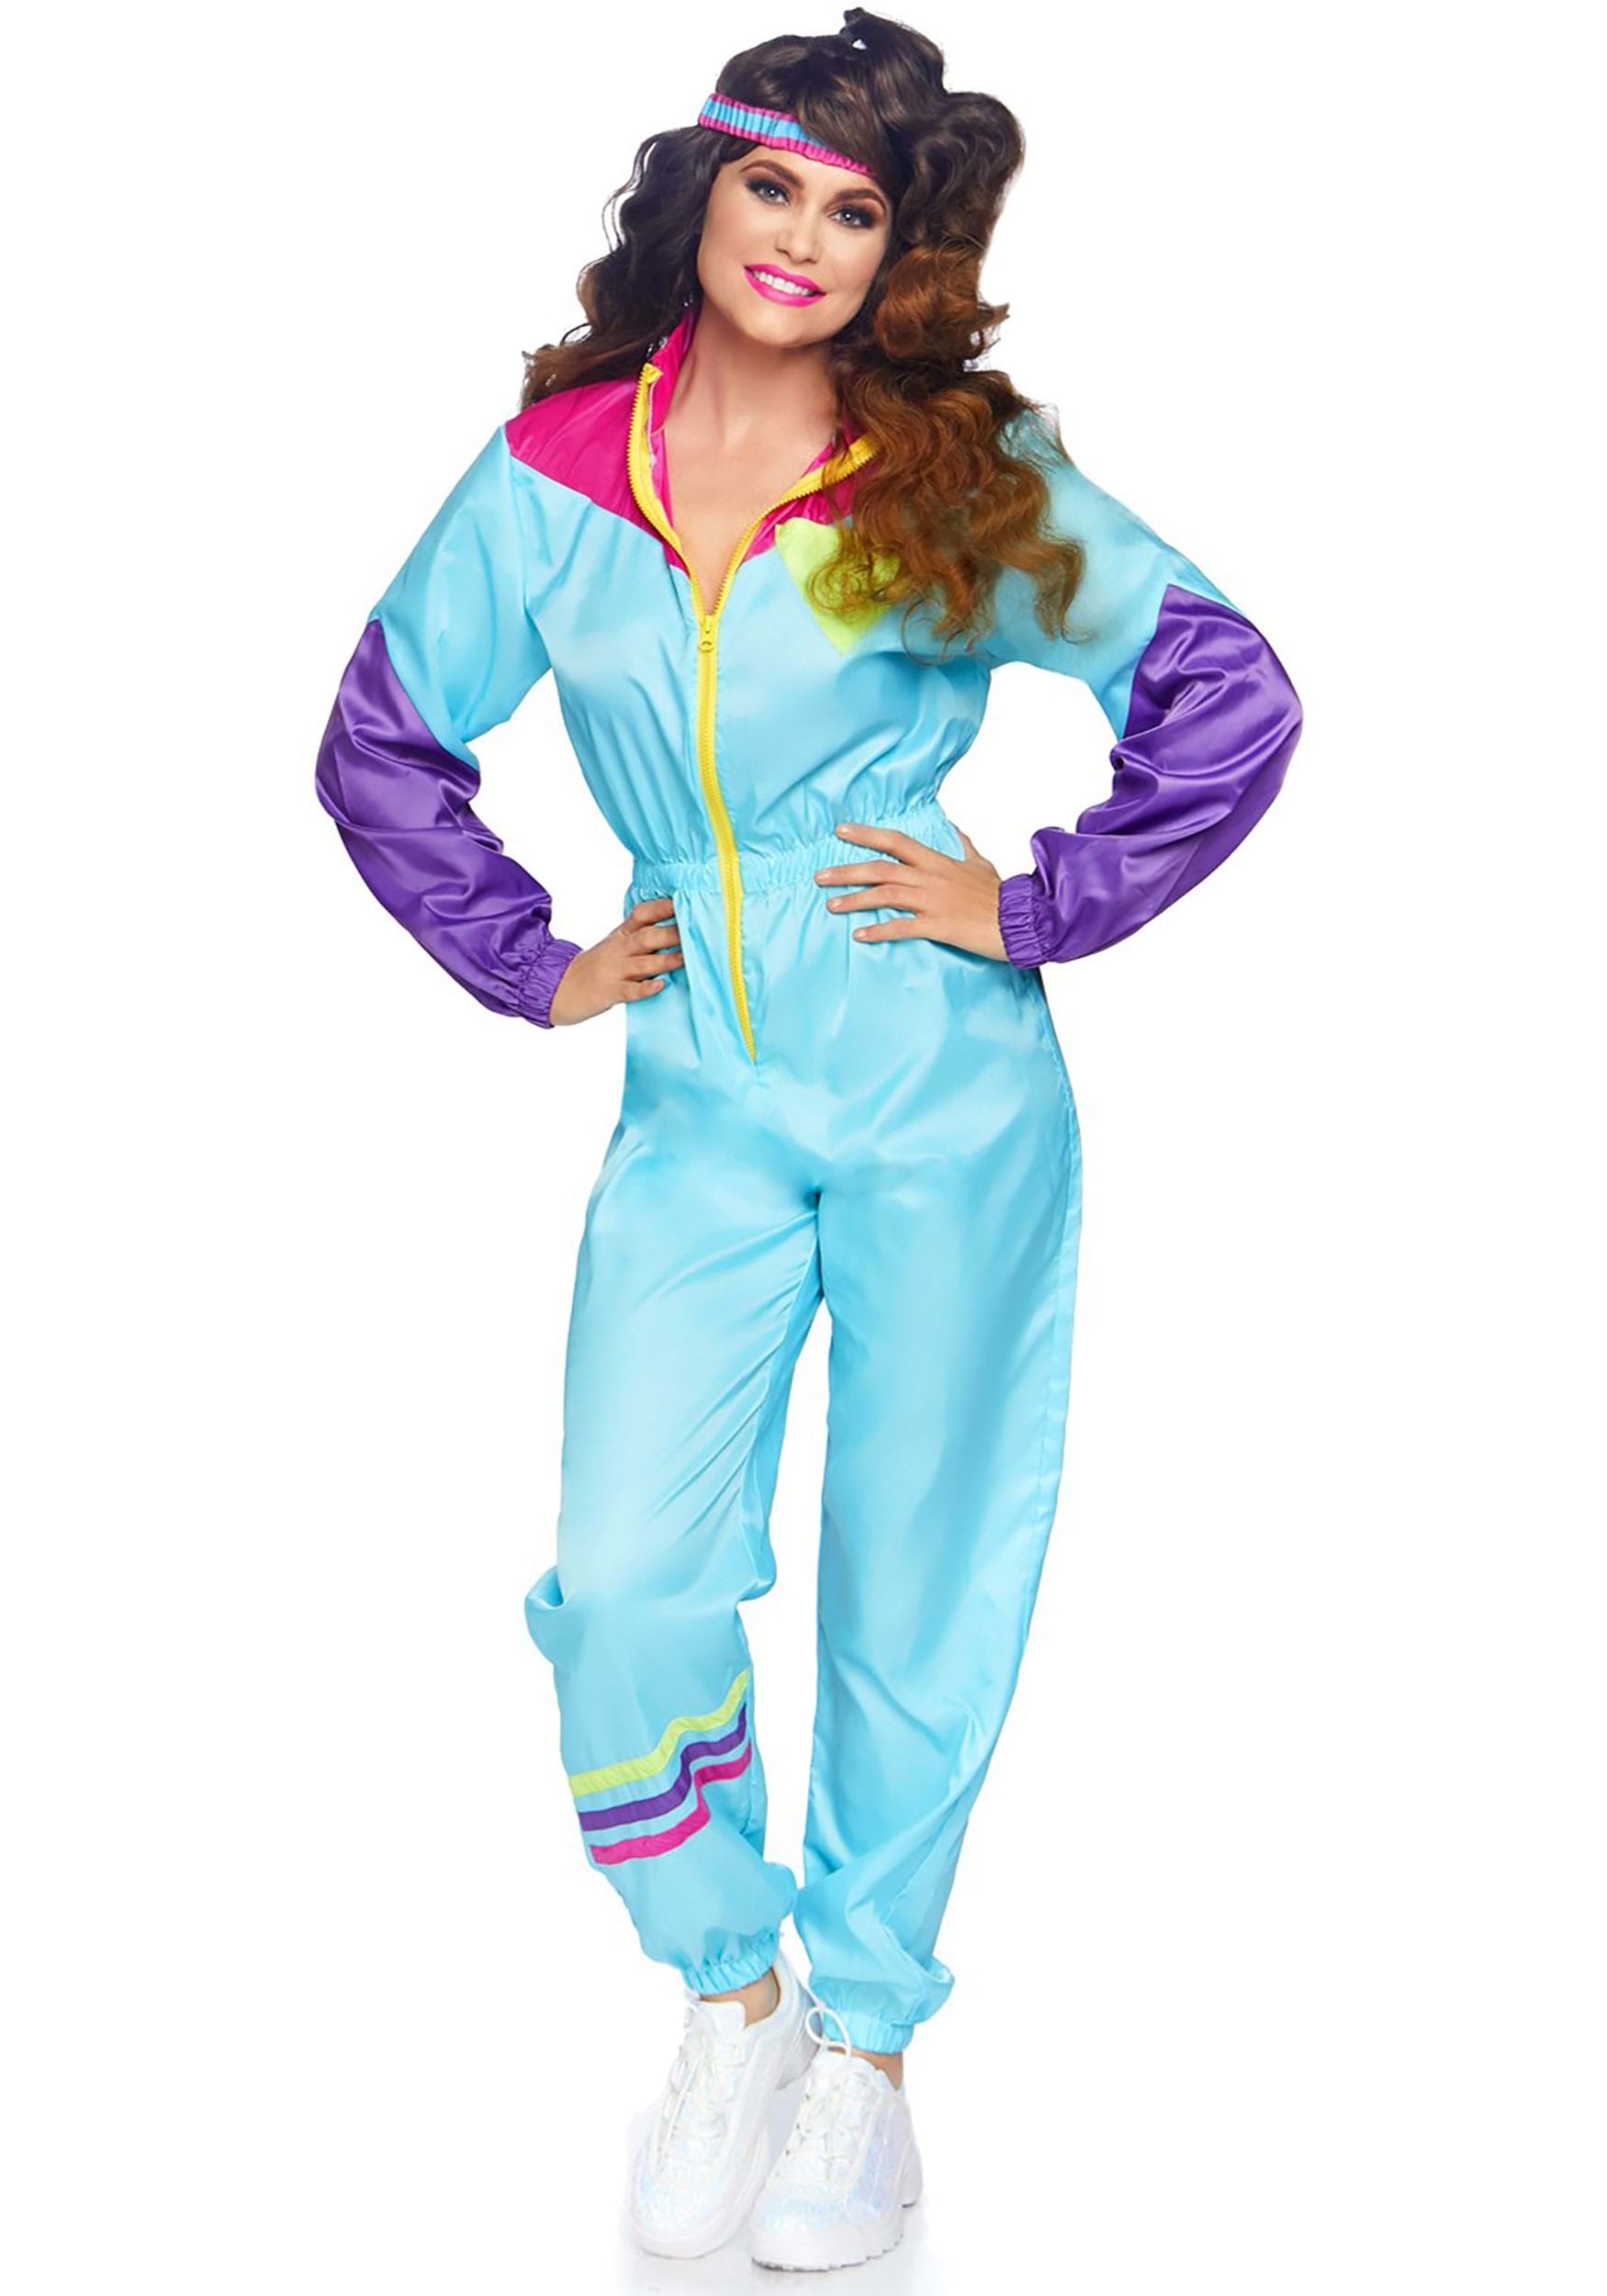 Women’s Awesome 80s Ski Suit Costume